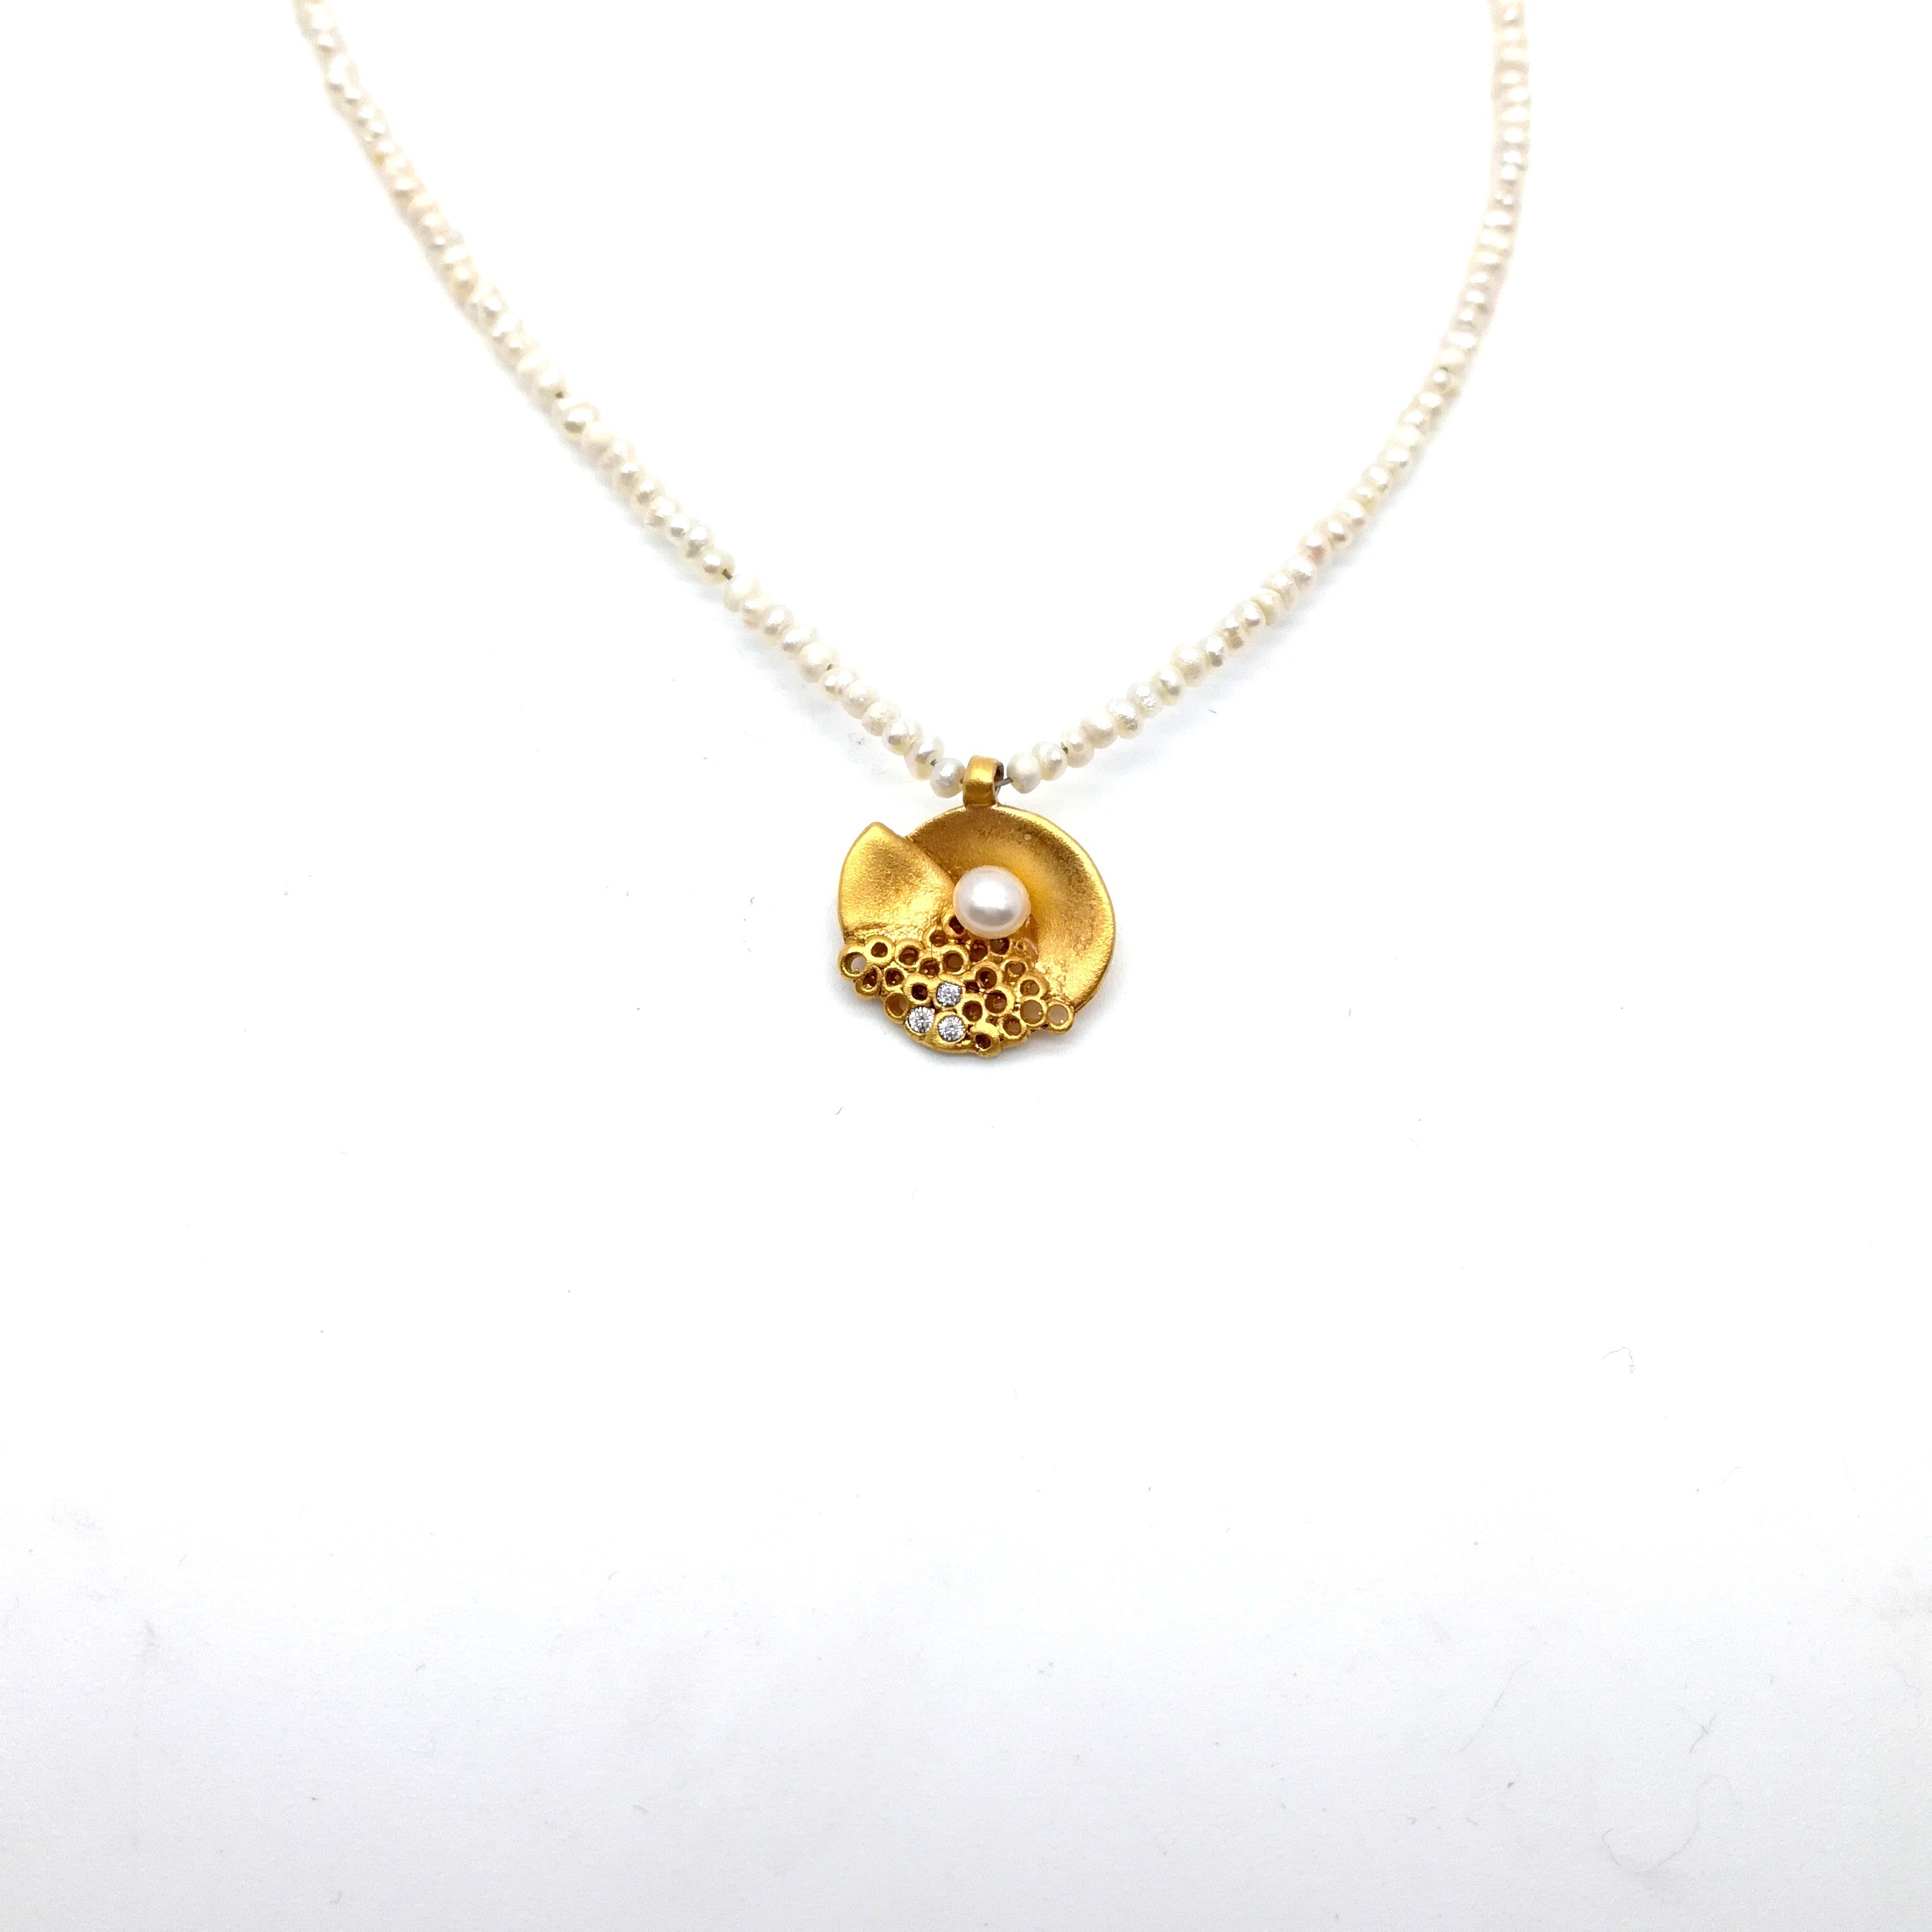 Silver necklace 925 gold plated with pearl and synthetic stones